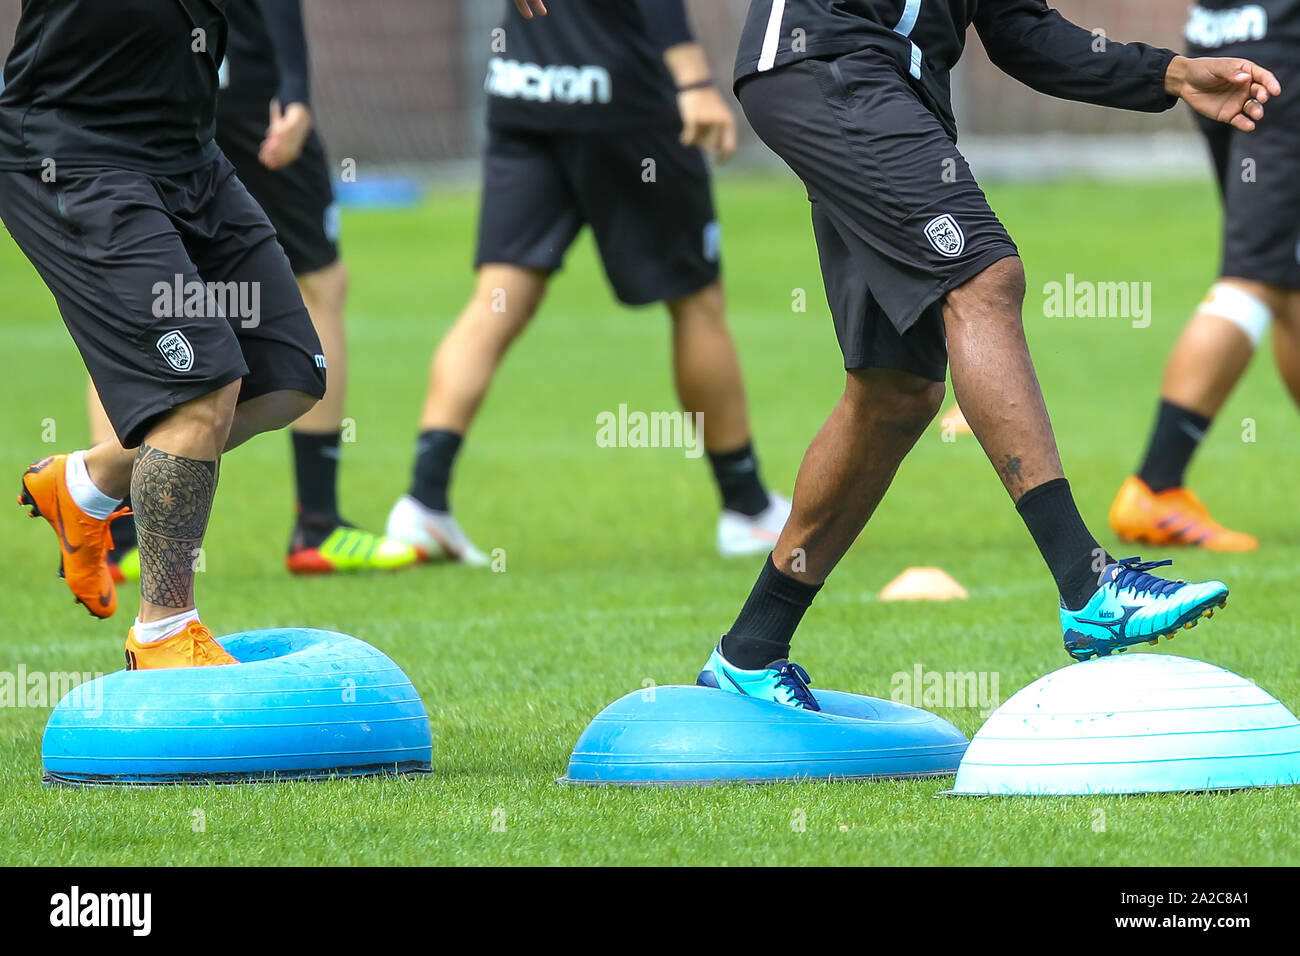 Horst, Netherlands - June 25, 2018: The feet of PAOK players and football training equipment during the training of the team on the pitch. balance exe Stock Photo